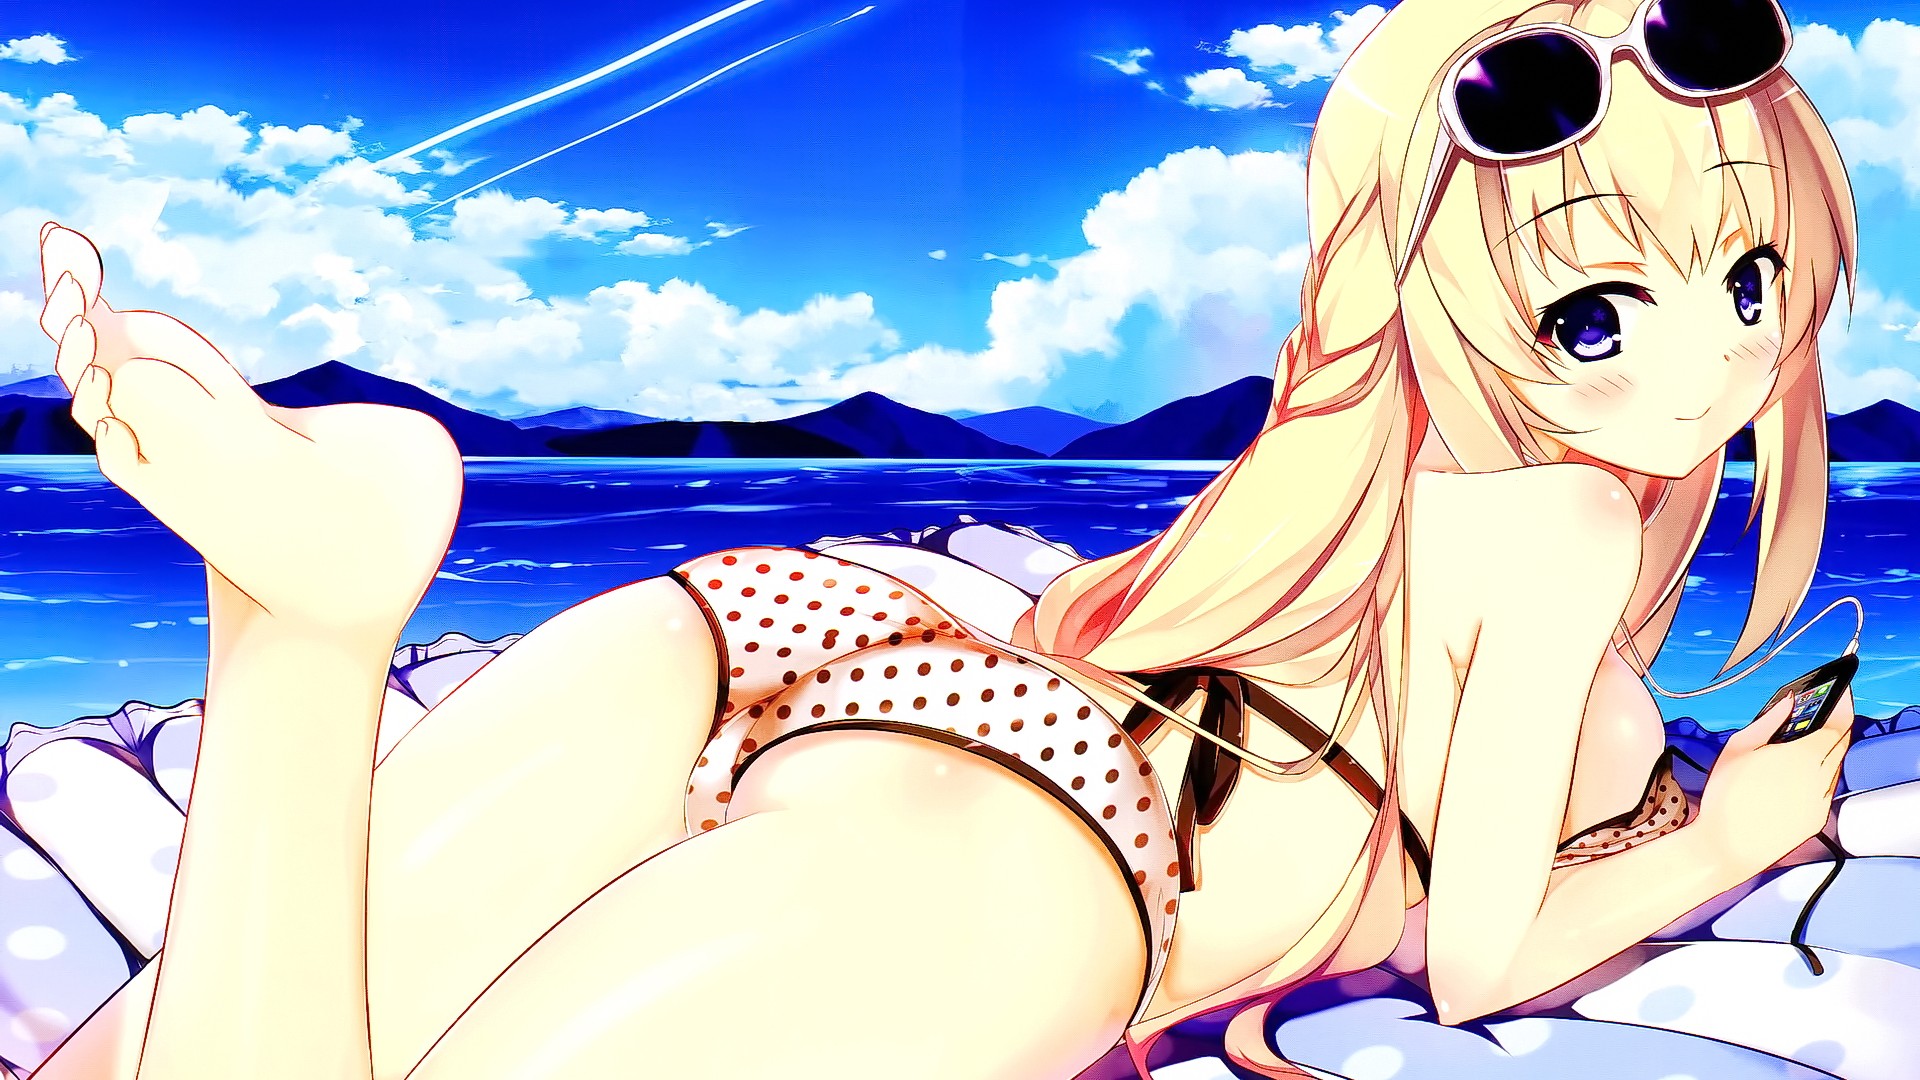 Anime 1920x1080 anime anime girls Hyperdimension Neptunia Vert (Hyperdimension Neptunia) bikini beach ass glasses purple eyes blonde long hair smiling sky clouds mountains water sunglasses looking at viewer feet lying on front Kaho Okashii women with shades women outdoors barefoot